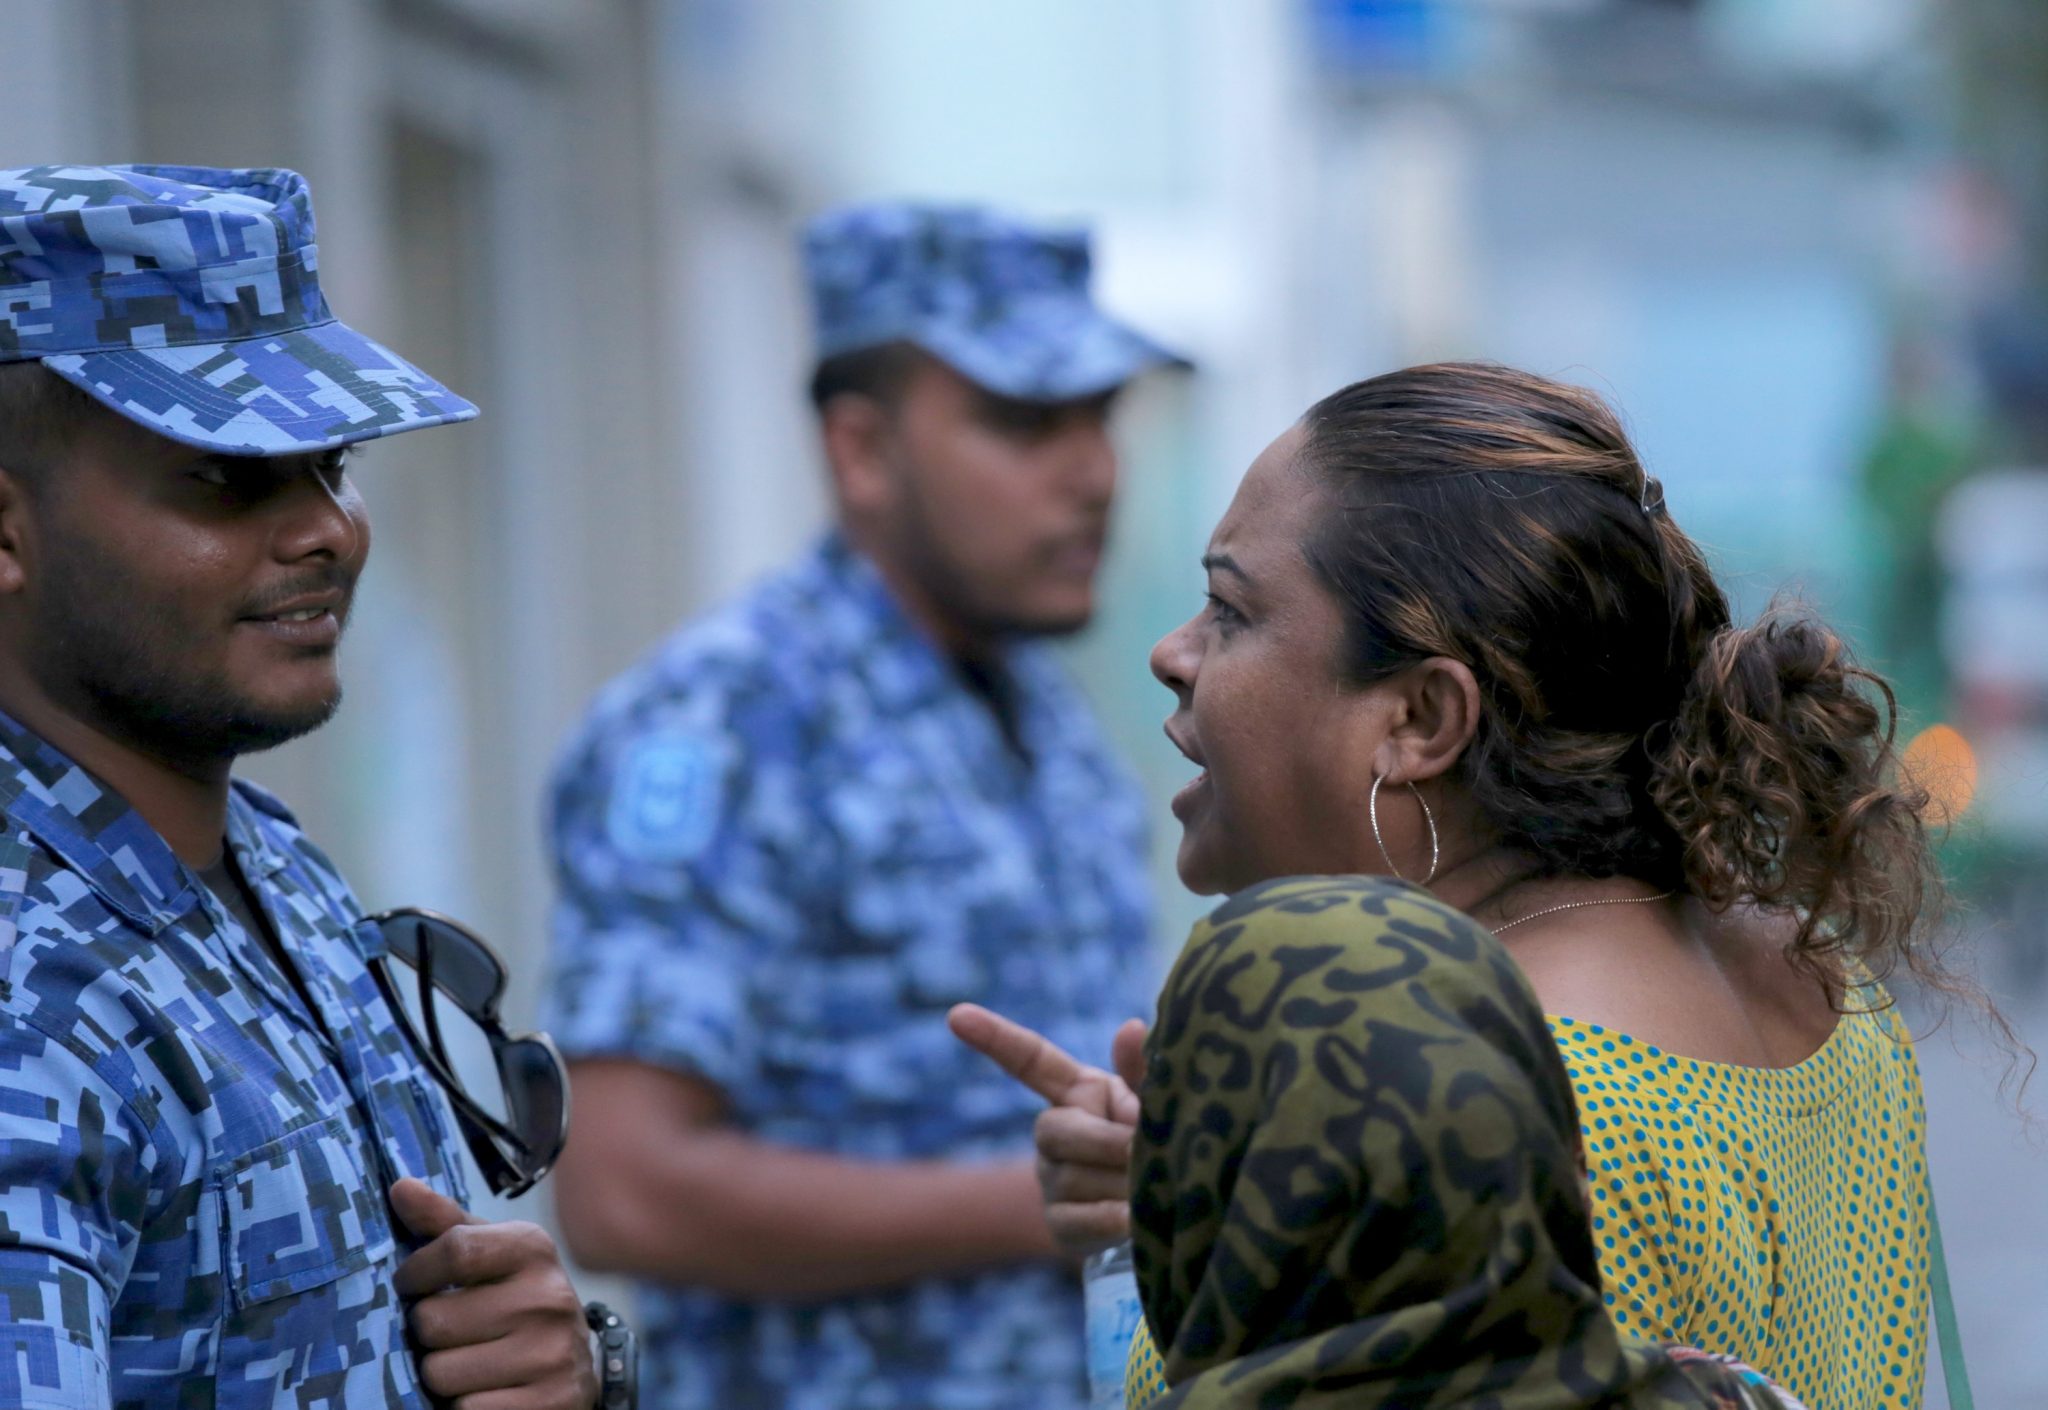 A Maldivian opposition activist argues with a policeman outside parliament in Male on March 27, 2017.  Security forces physically ejected protesting MPs from the Maldives parliament March 27 in chaotic scenes during a failed opposition attempt to impeach the speaker and destabilise the president ahead of elections next year. Lawmakers shouted and stood on their chairs and one tried to physically remove the speaker's seat ahead of the impeachment vote, which came a day after exiled opposition leader Mohamed Nasheed announced a unity pact with the president's powerful half-brother -- the former strongman Maumoon Abdul Gayoom. / AFP PHOTO / STR